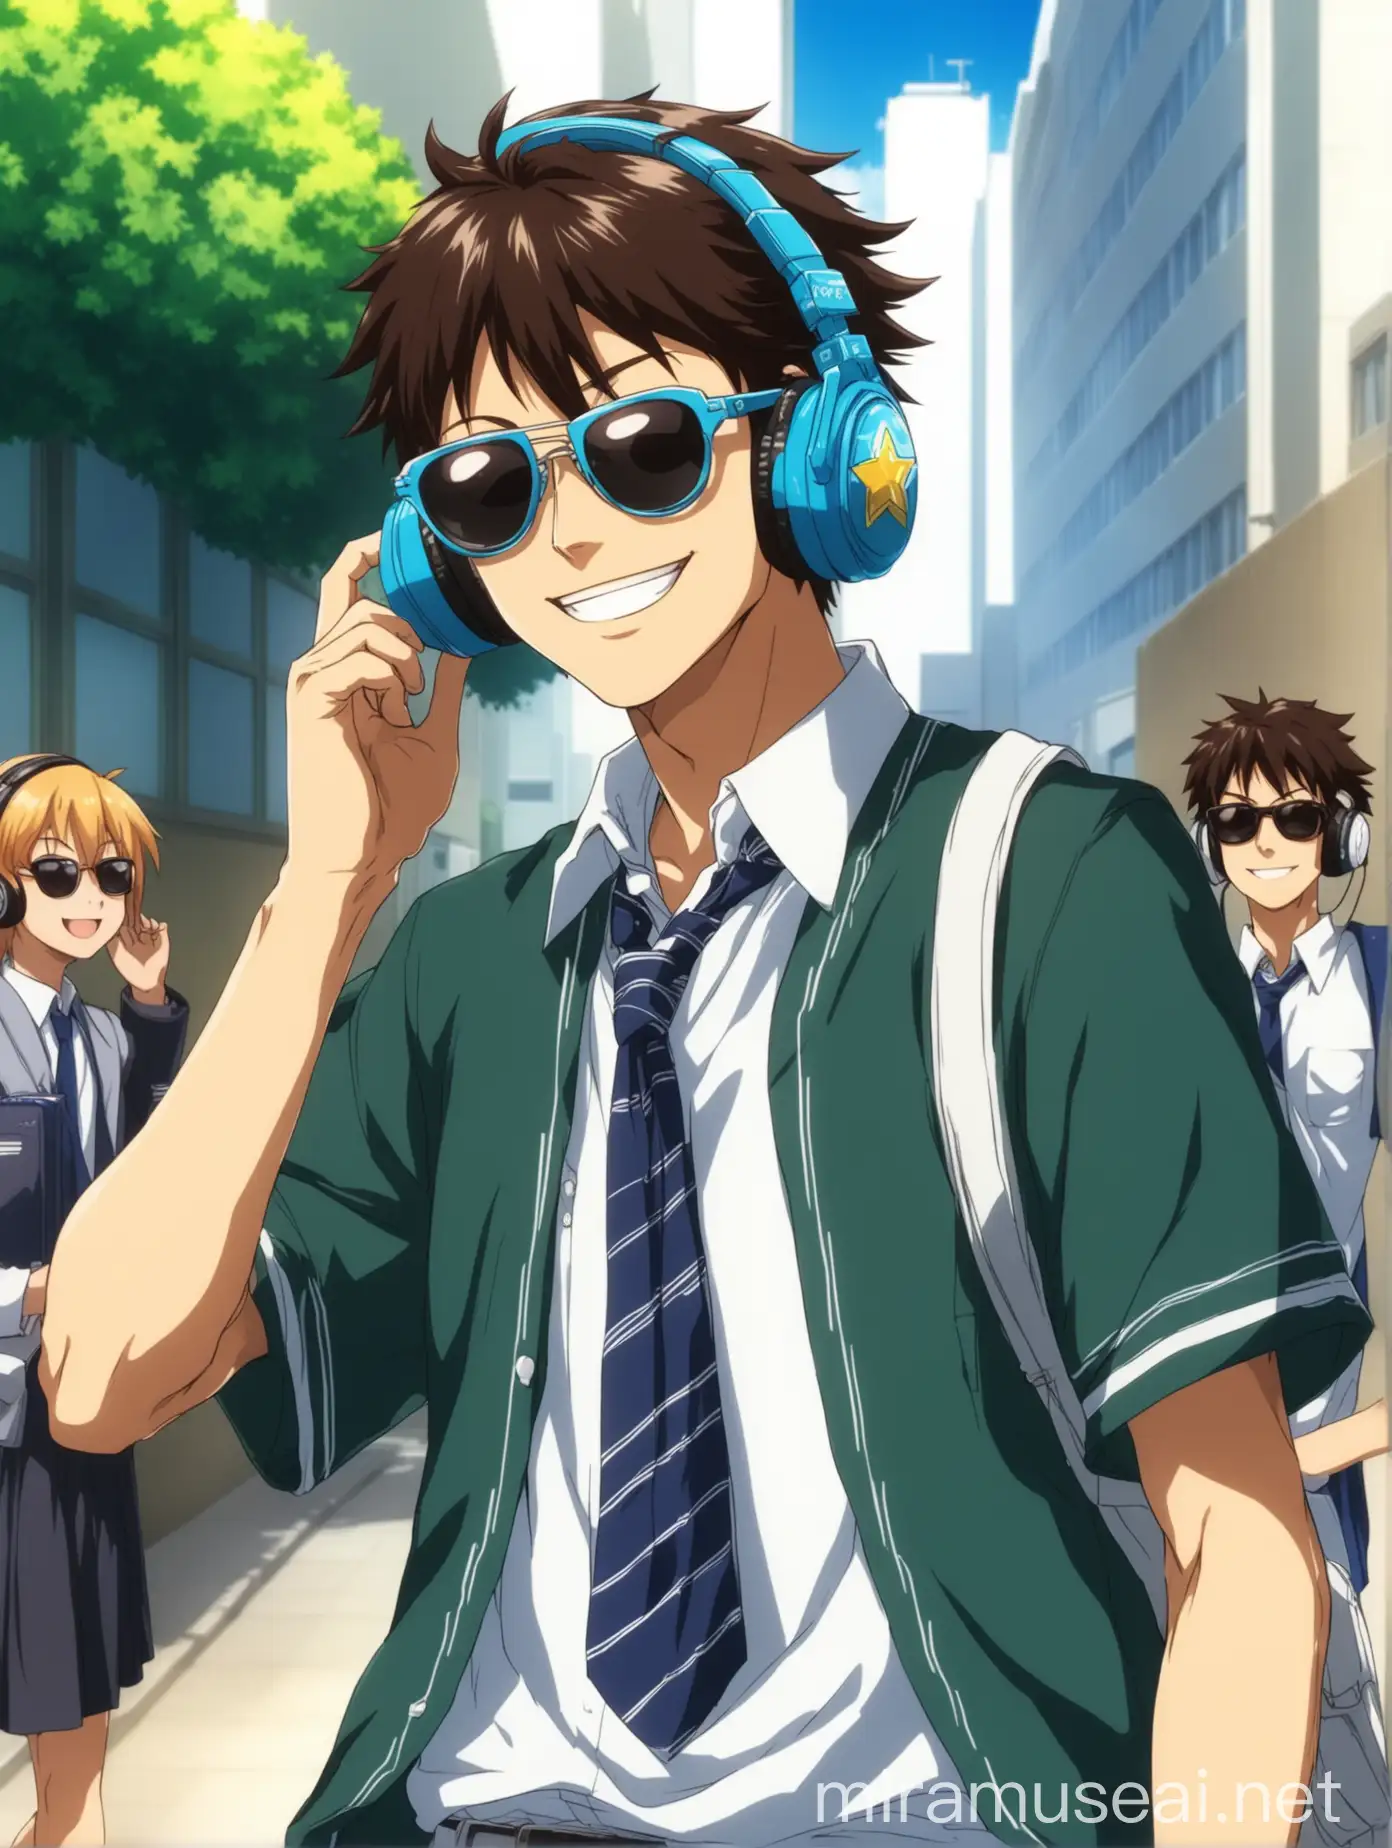 Smiling Anime School Boy with Sunglasses and Headphones